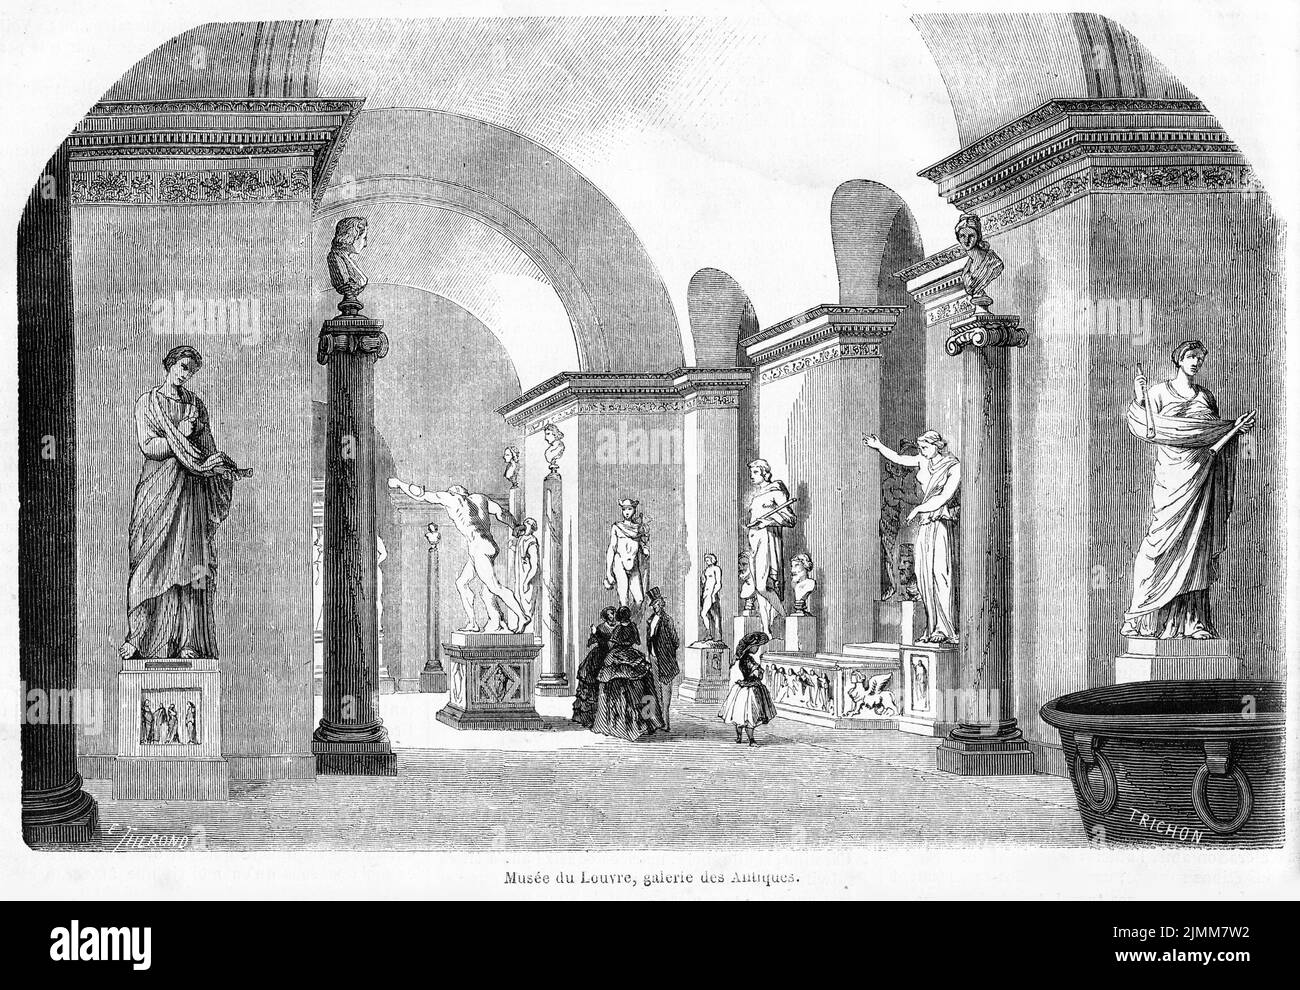 Illustration from the French magazine Journal Pour Tous (newspaper for all) in 1856, showing the gallery of antique statues in the Louvre museum Stock Photo